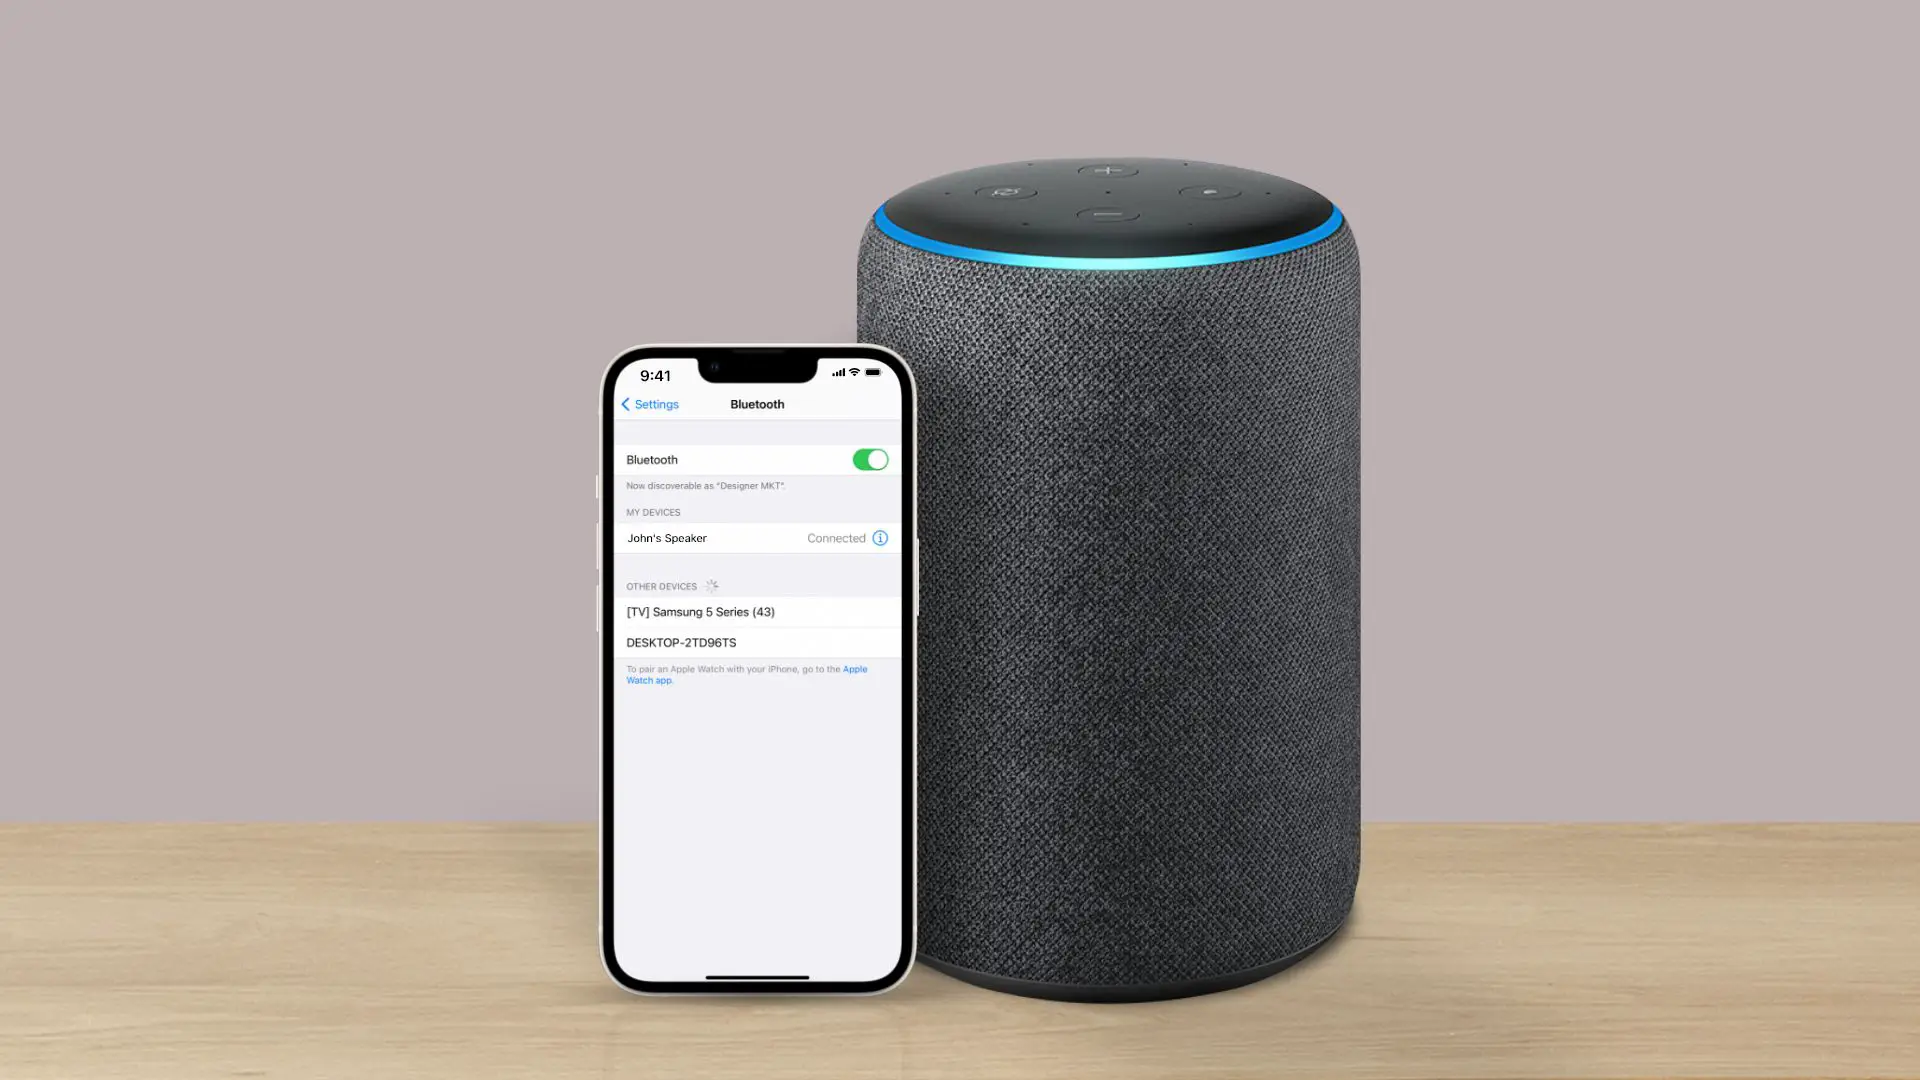 Discover how to connect two Bluetooth speakers to one iPhone